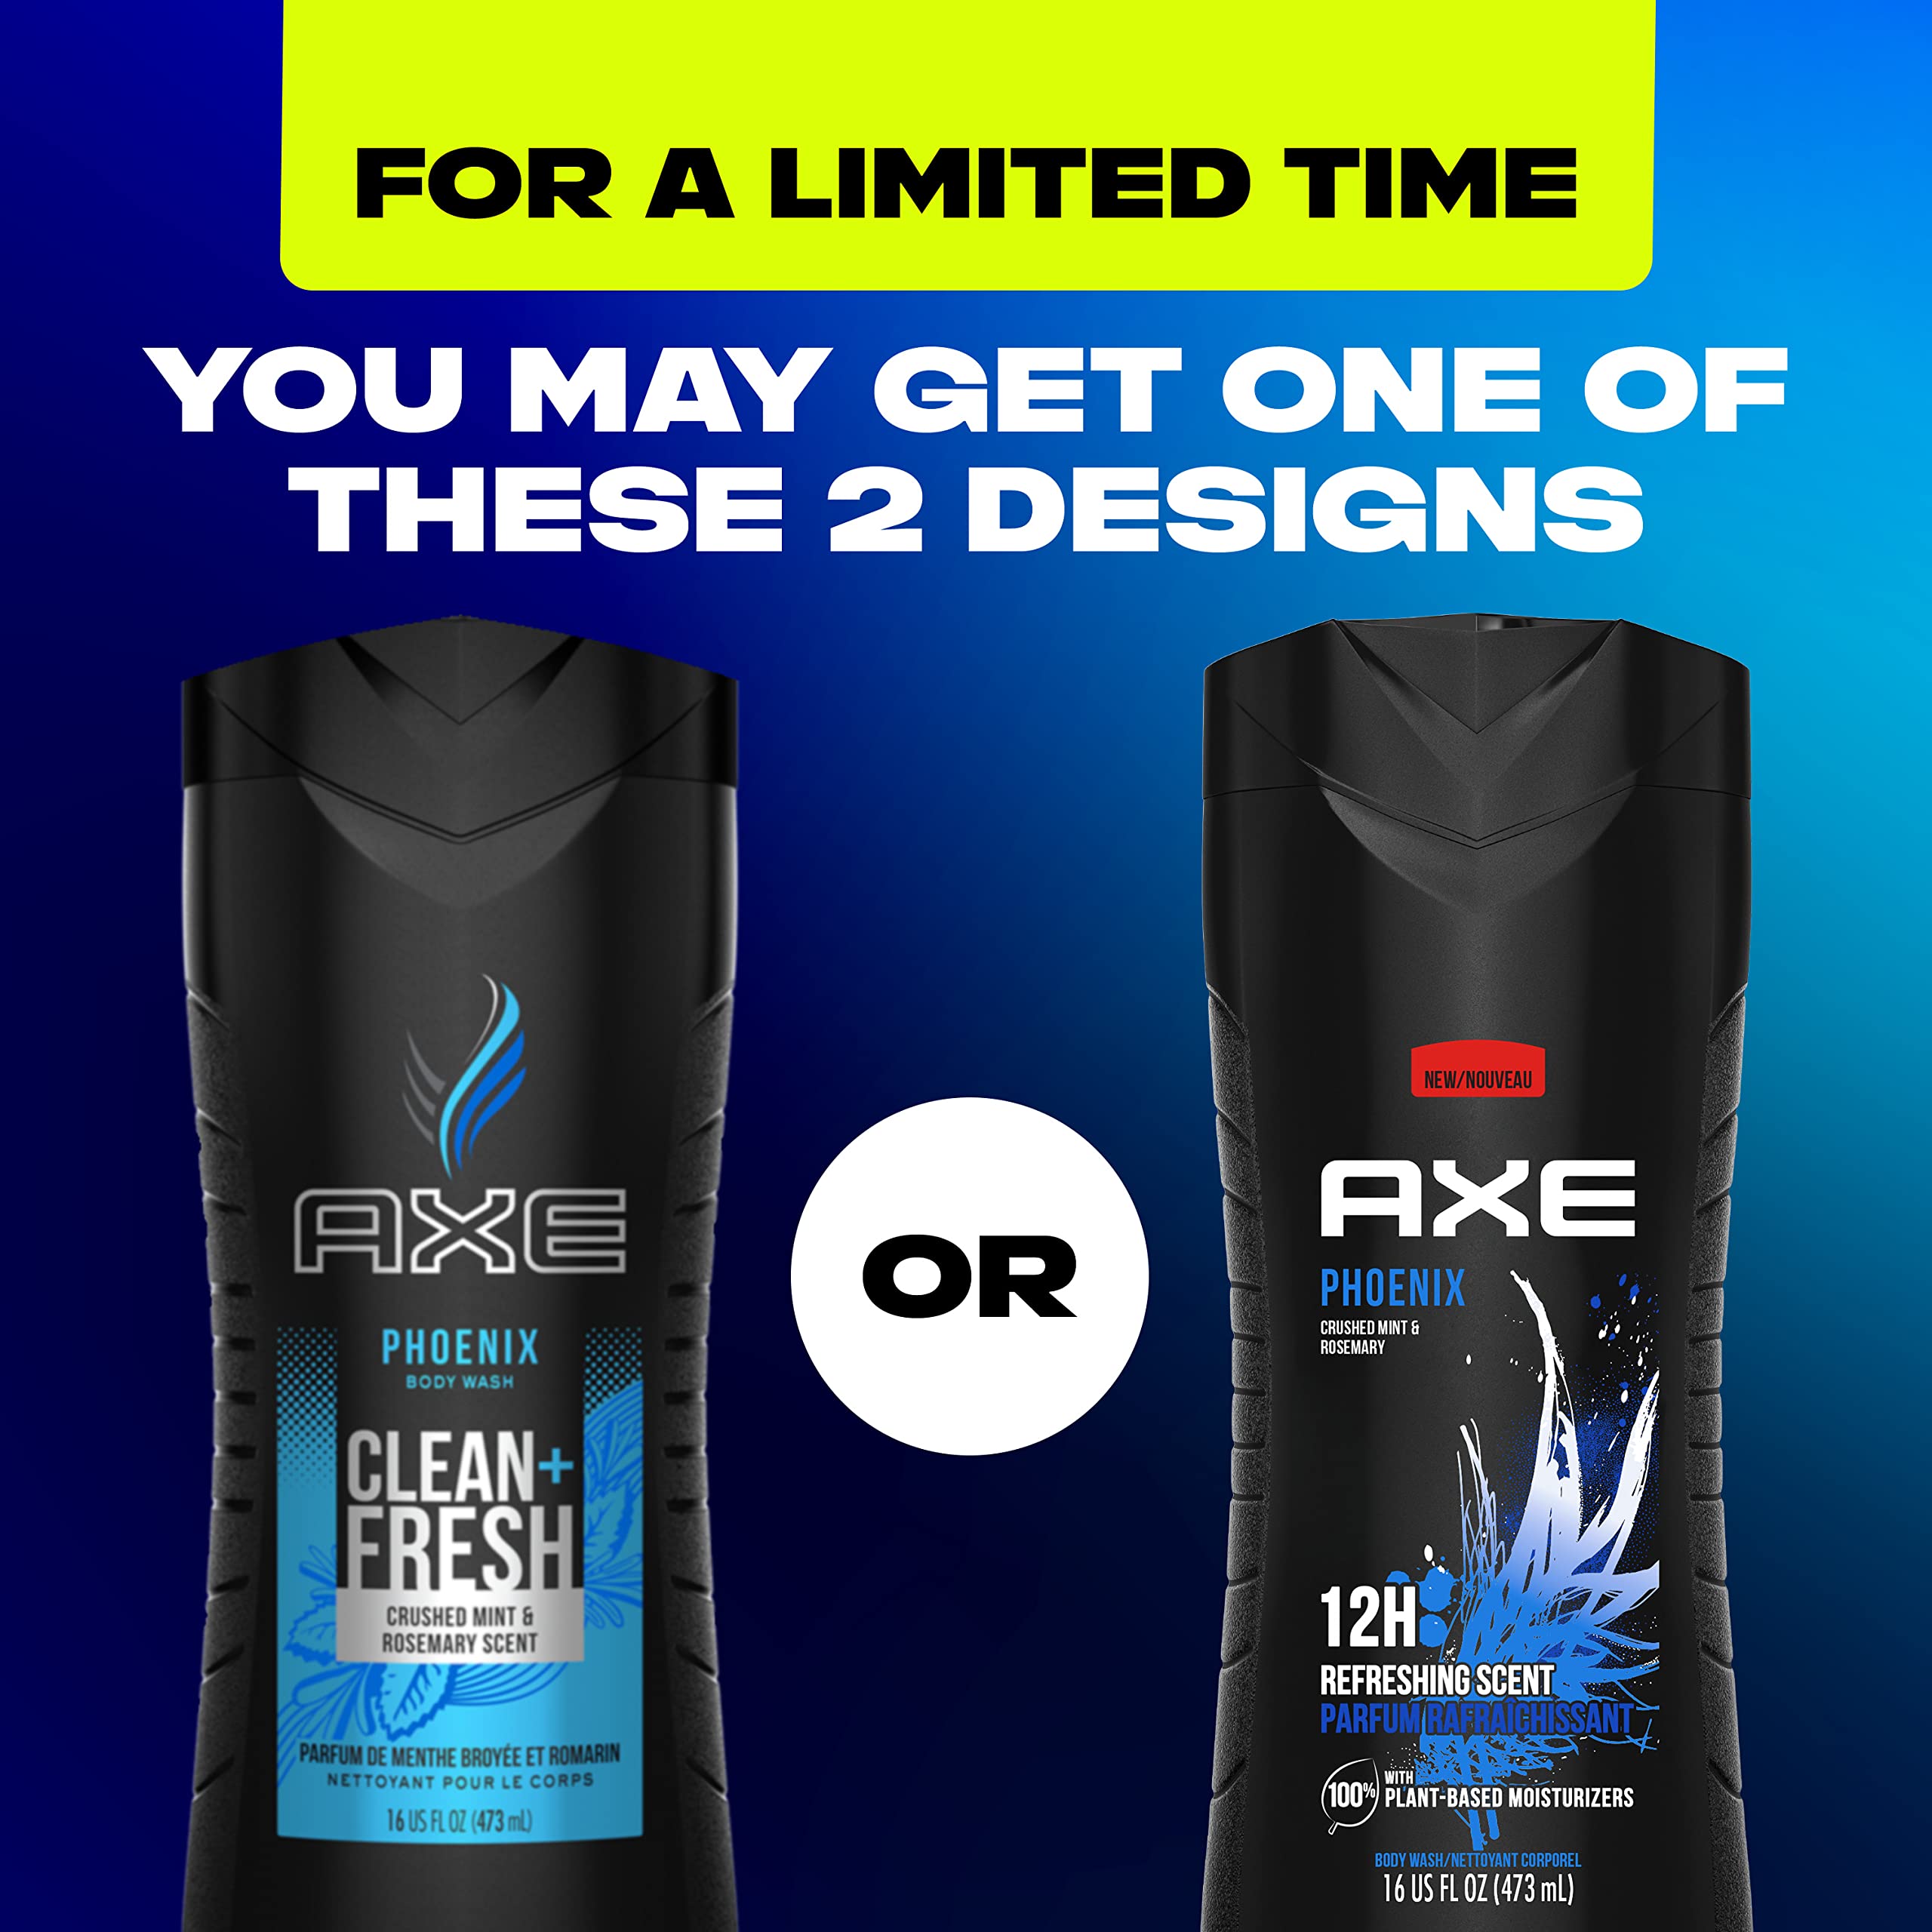 AXE Body Wash 12h Refreshing Scent Phoenix Crushed Mint & Rosemary Men's Body Wash With 100% Plant-Based Moisturizers 16oz 4 Pack